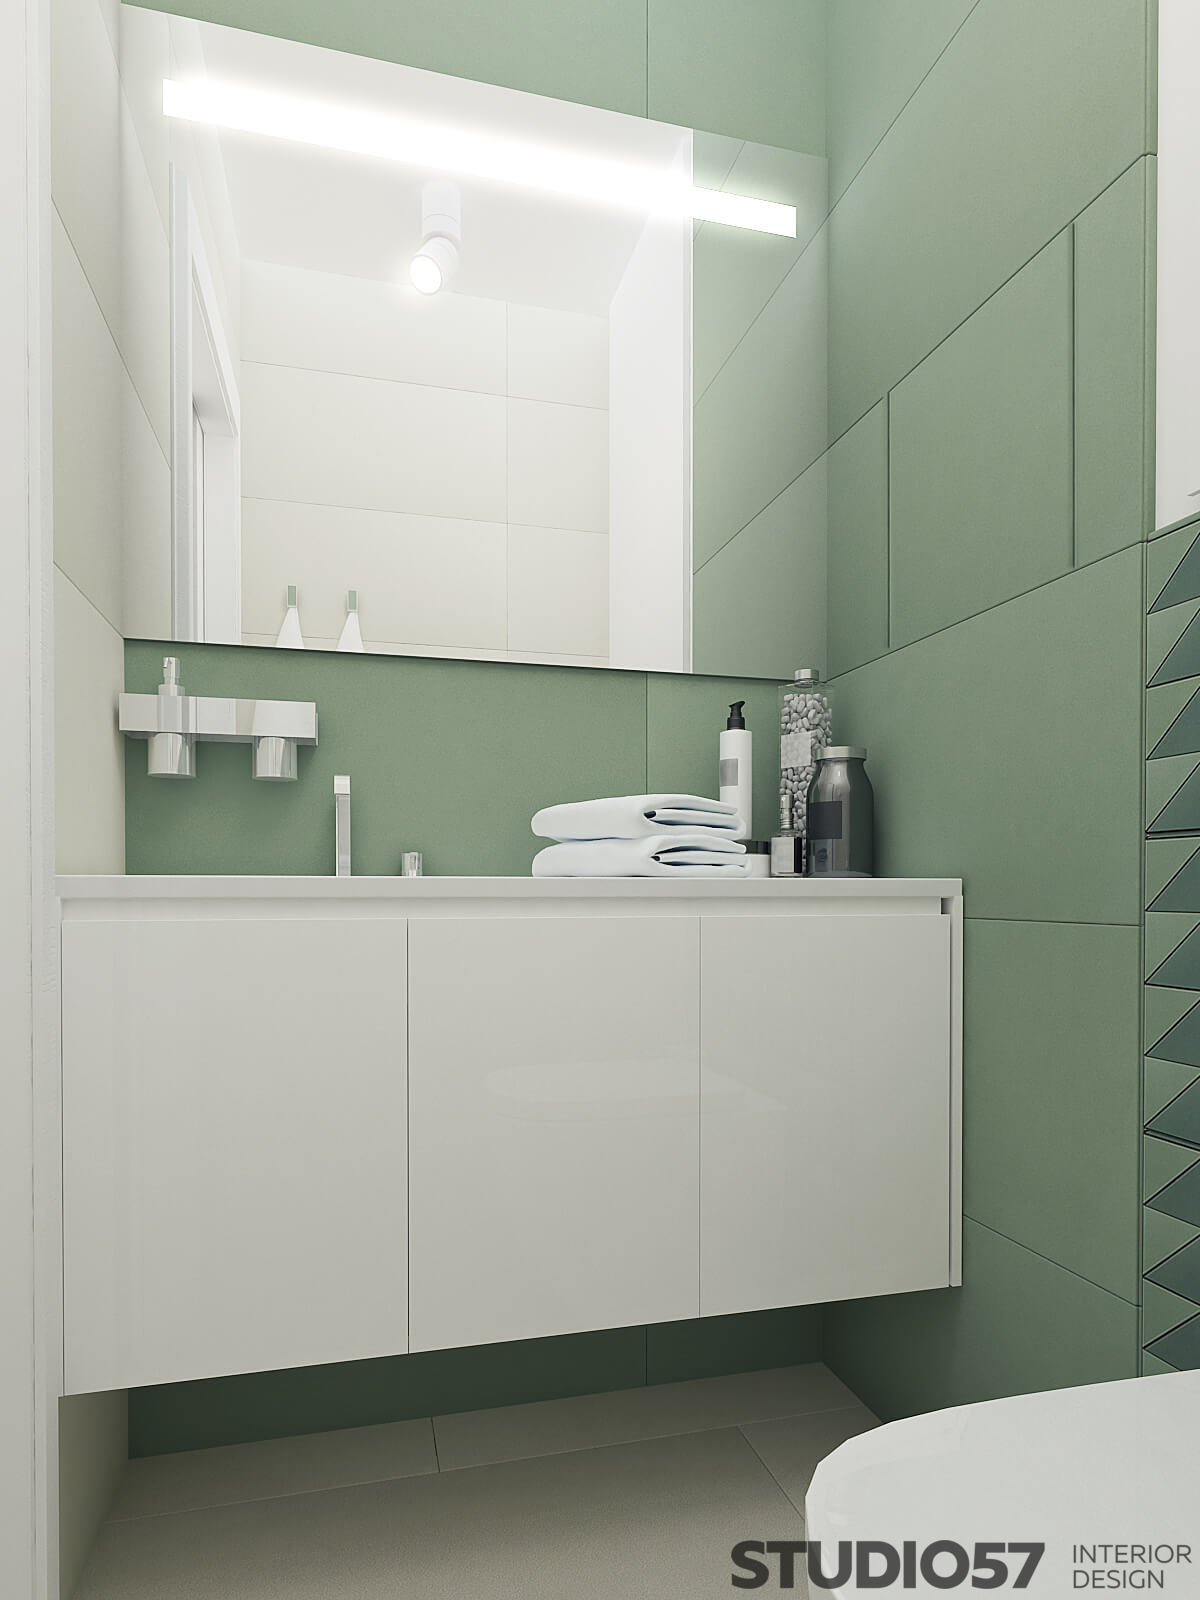 Photo of the bathroom in marsh color